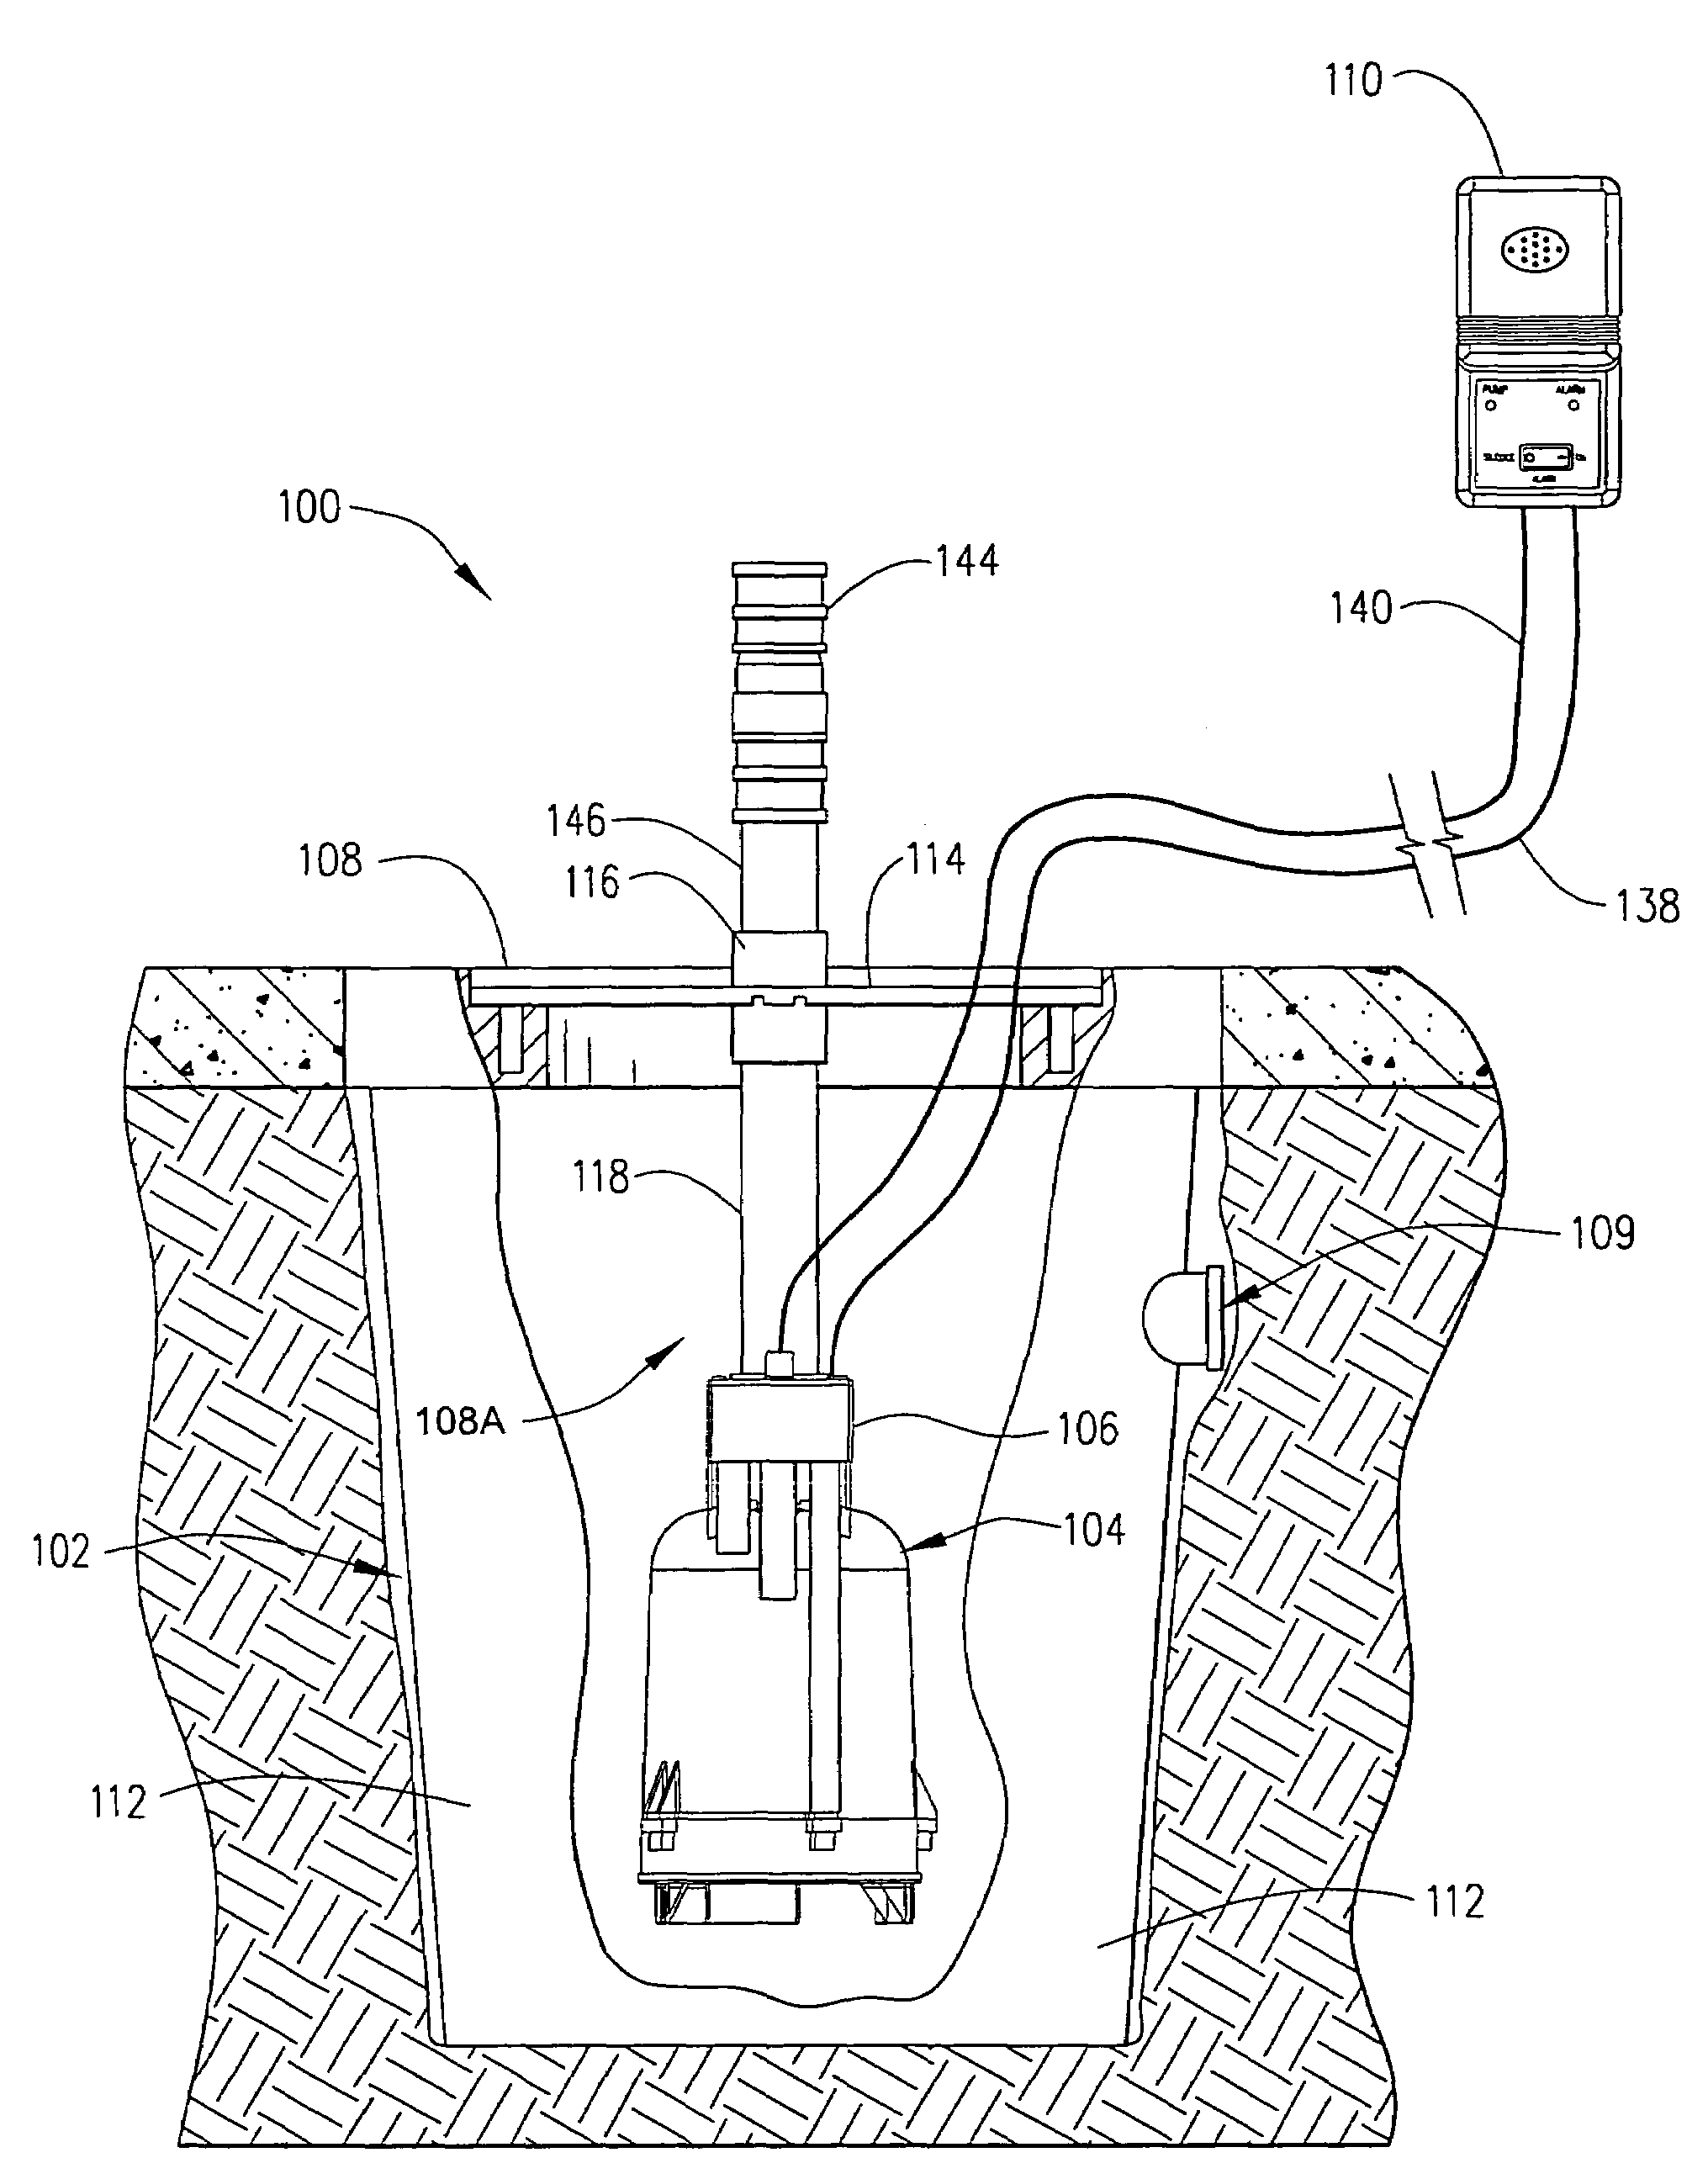 Automatic liquid collection and disposal assembly